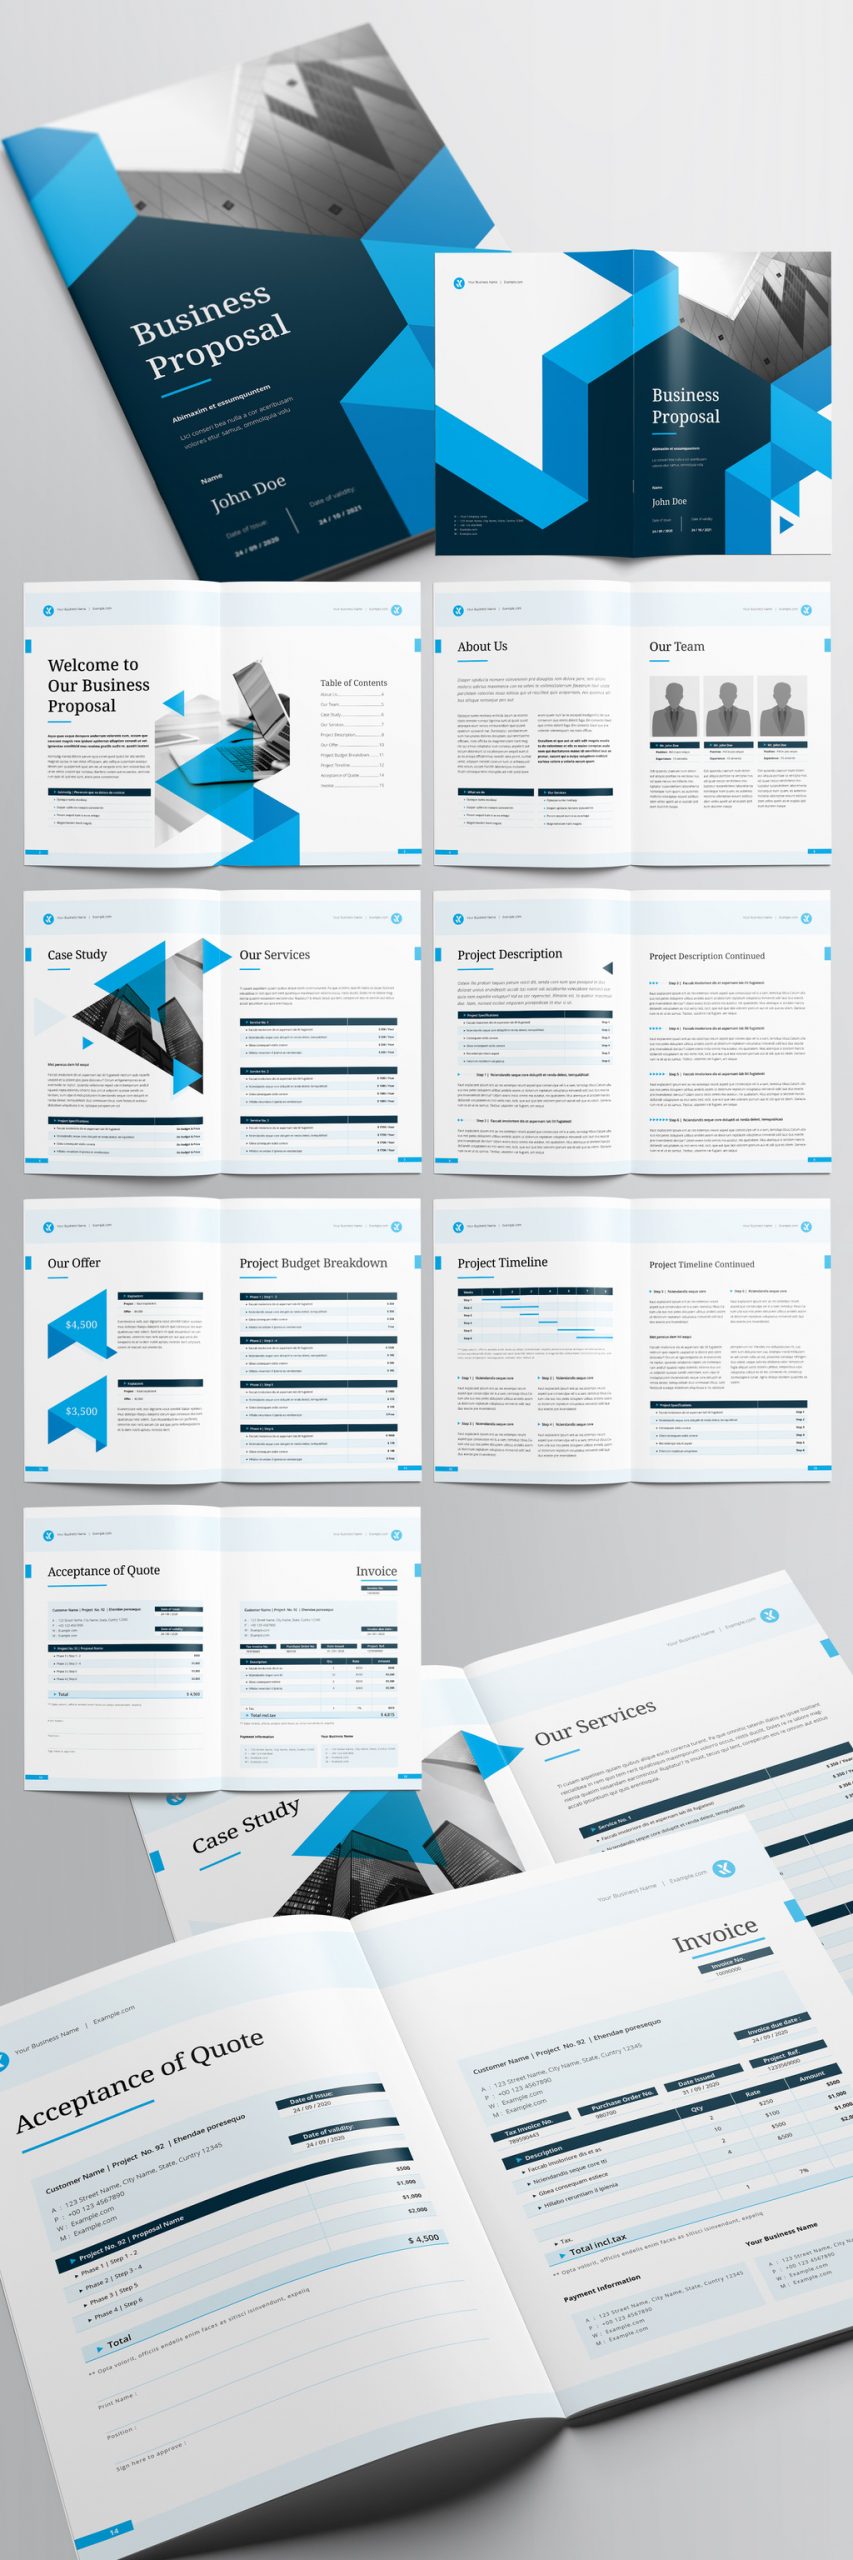 Business Proposal Template with Blue Accents